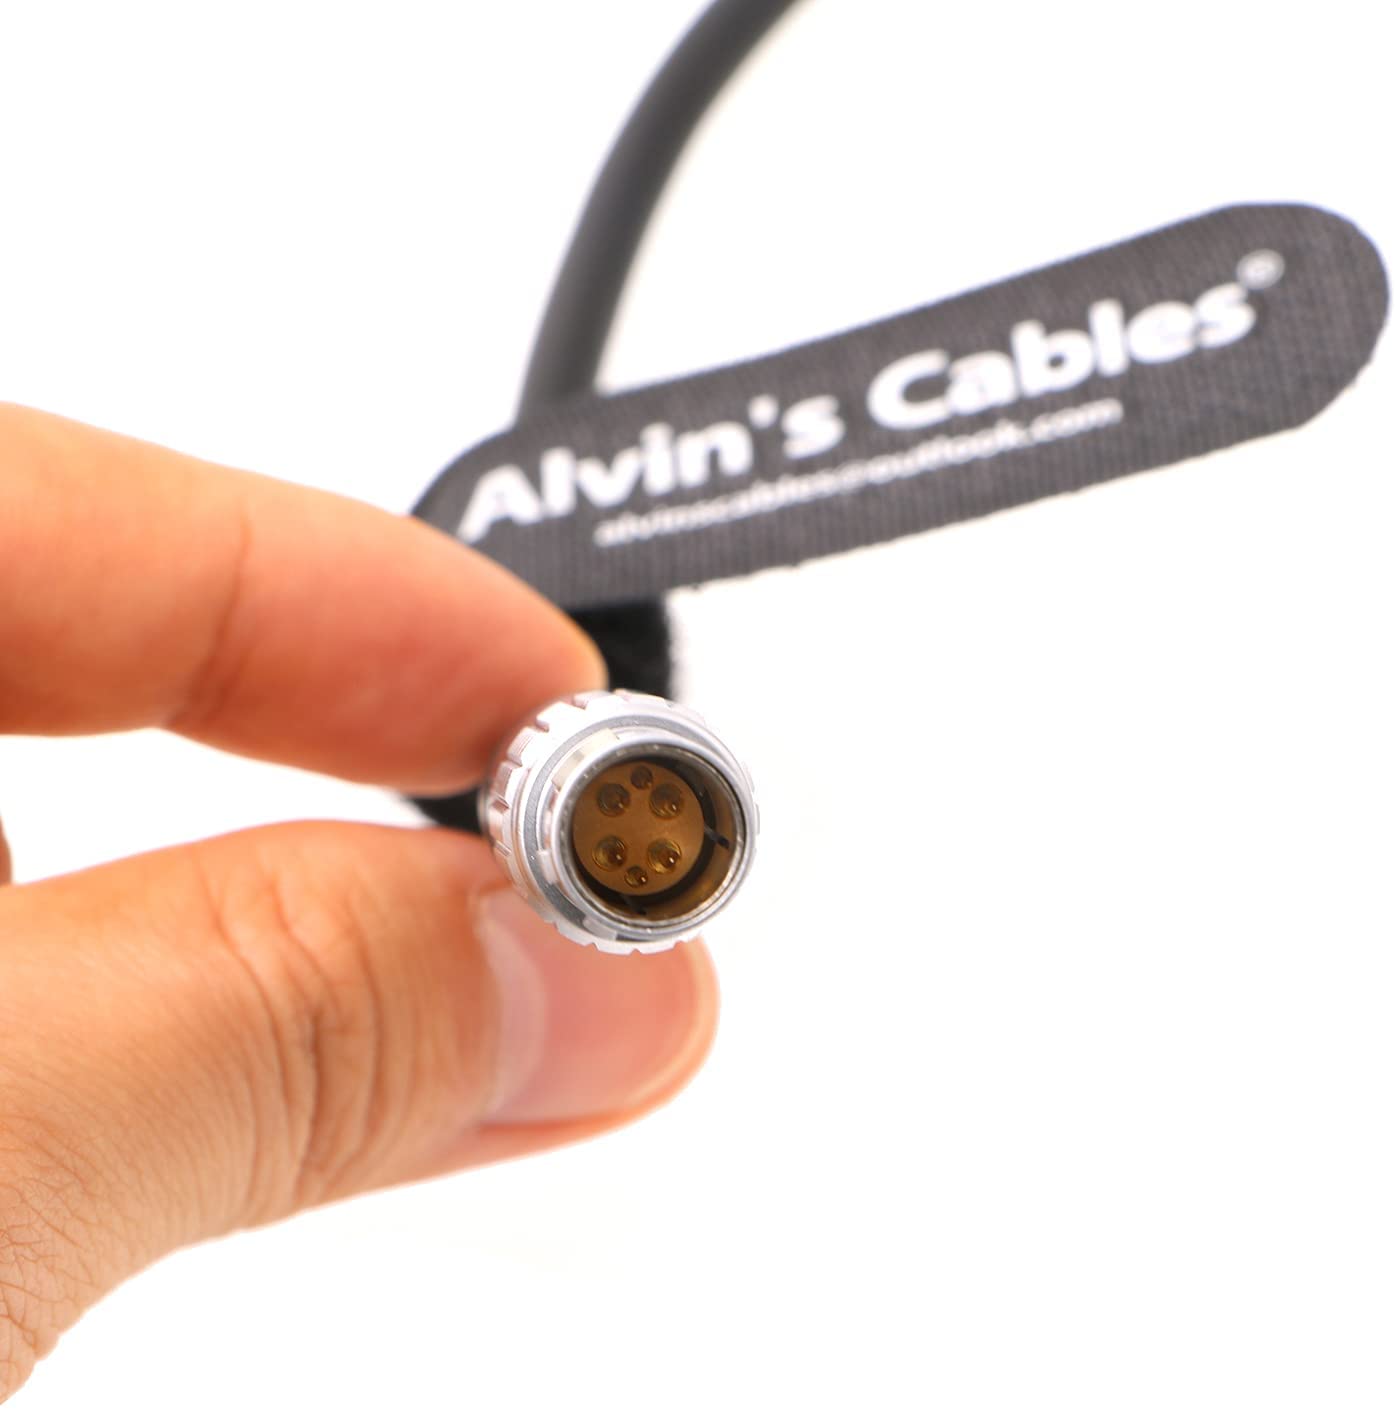 Alvin's Cables 6 Pin Male to 8 Pin Female Power Cable for DJI Ronin 2 Gimbal Stabilizer ARRI Alexa Mini LF Amira Camera 30cm| 12inches